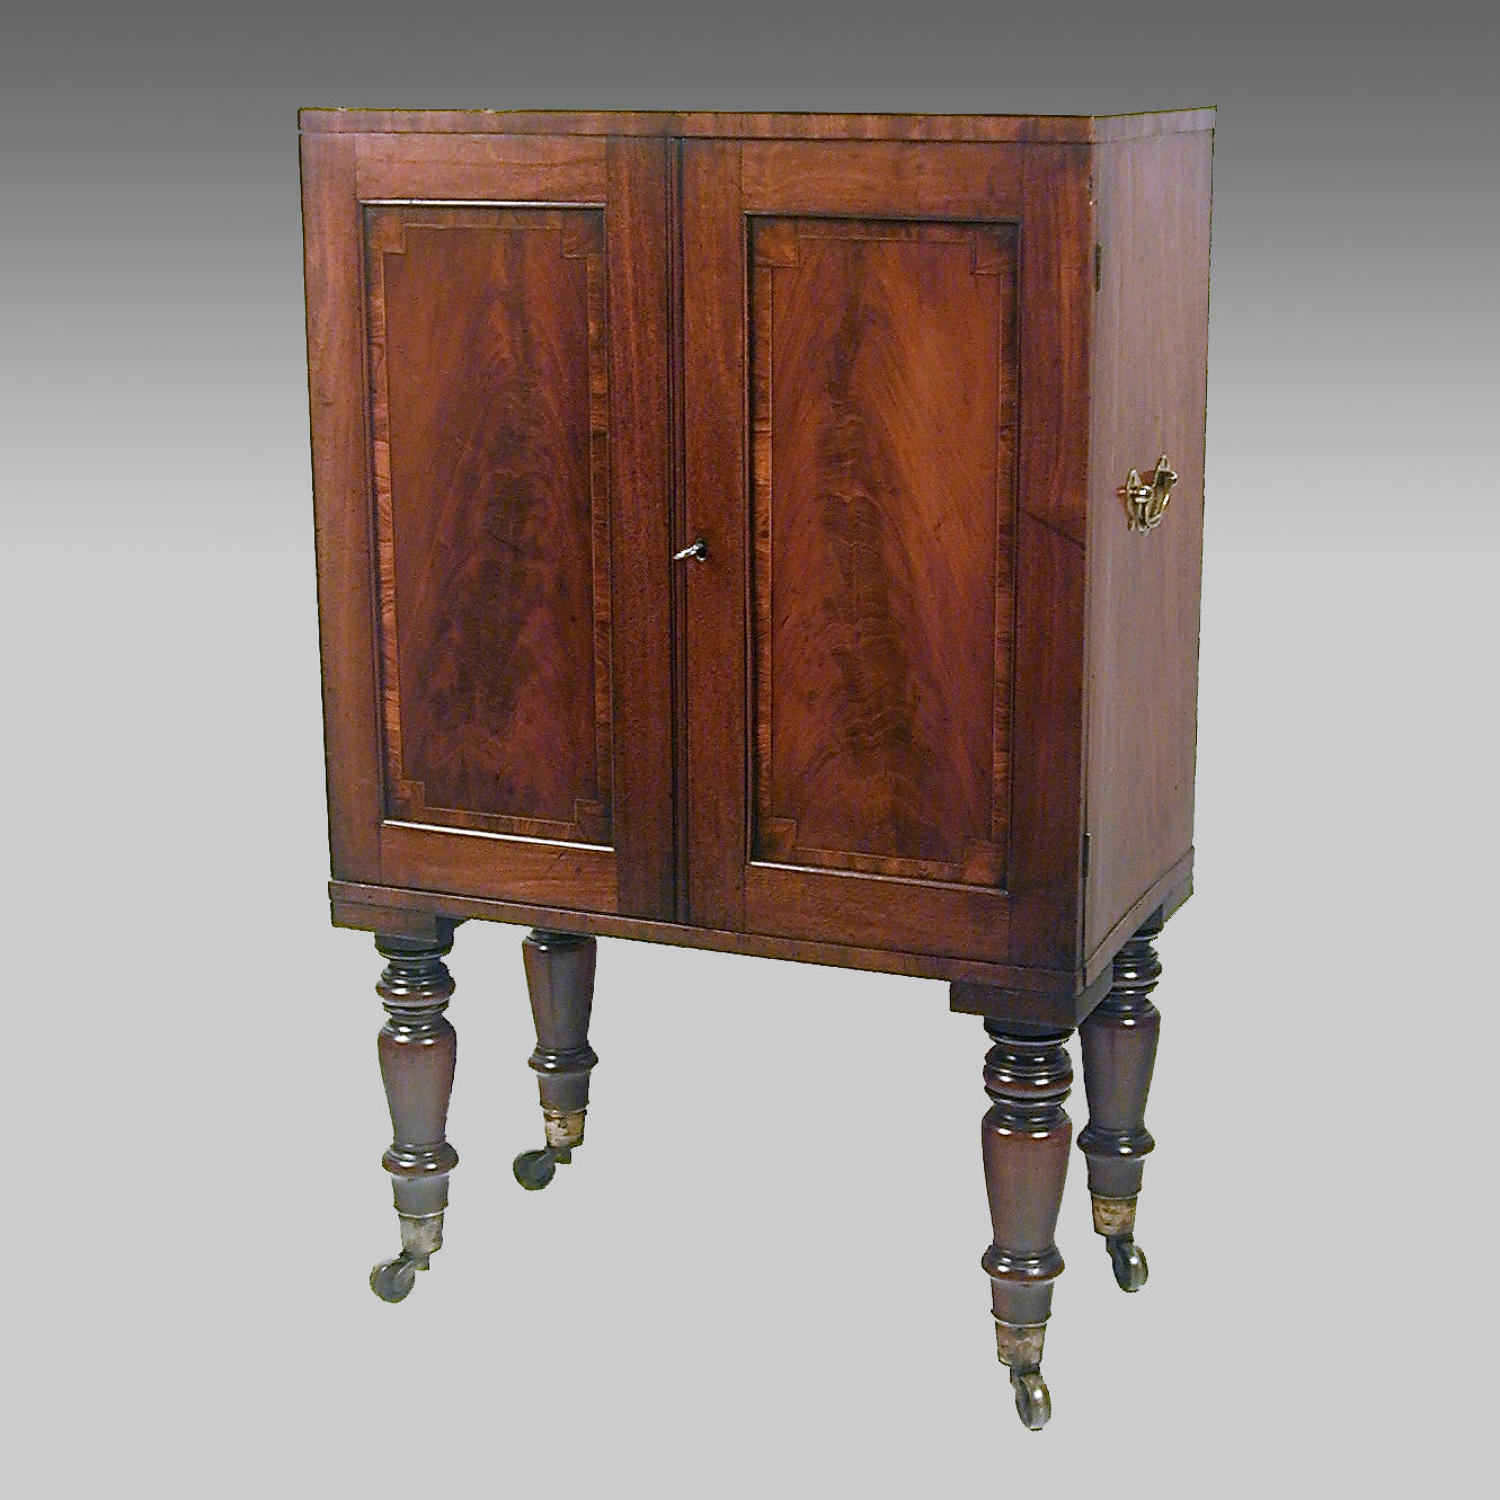 Small Sheraton mahogany collector's cabinet on stand